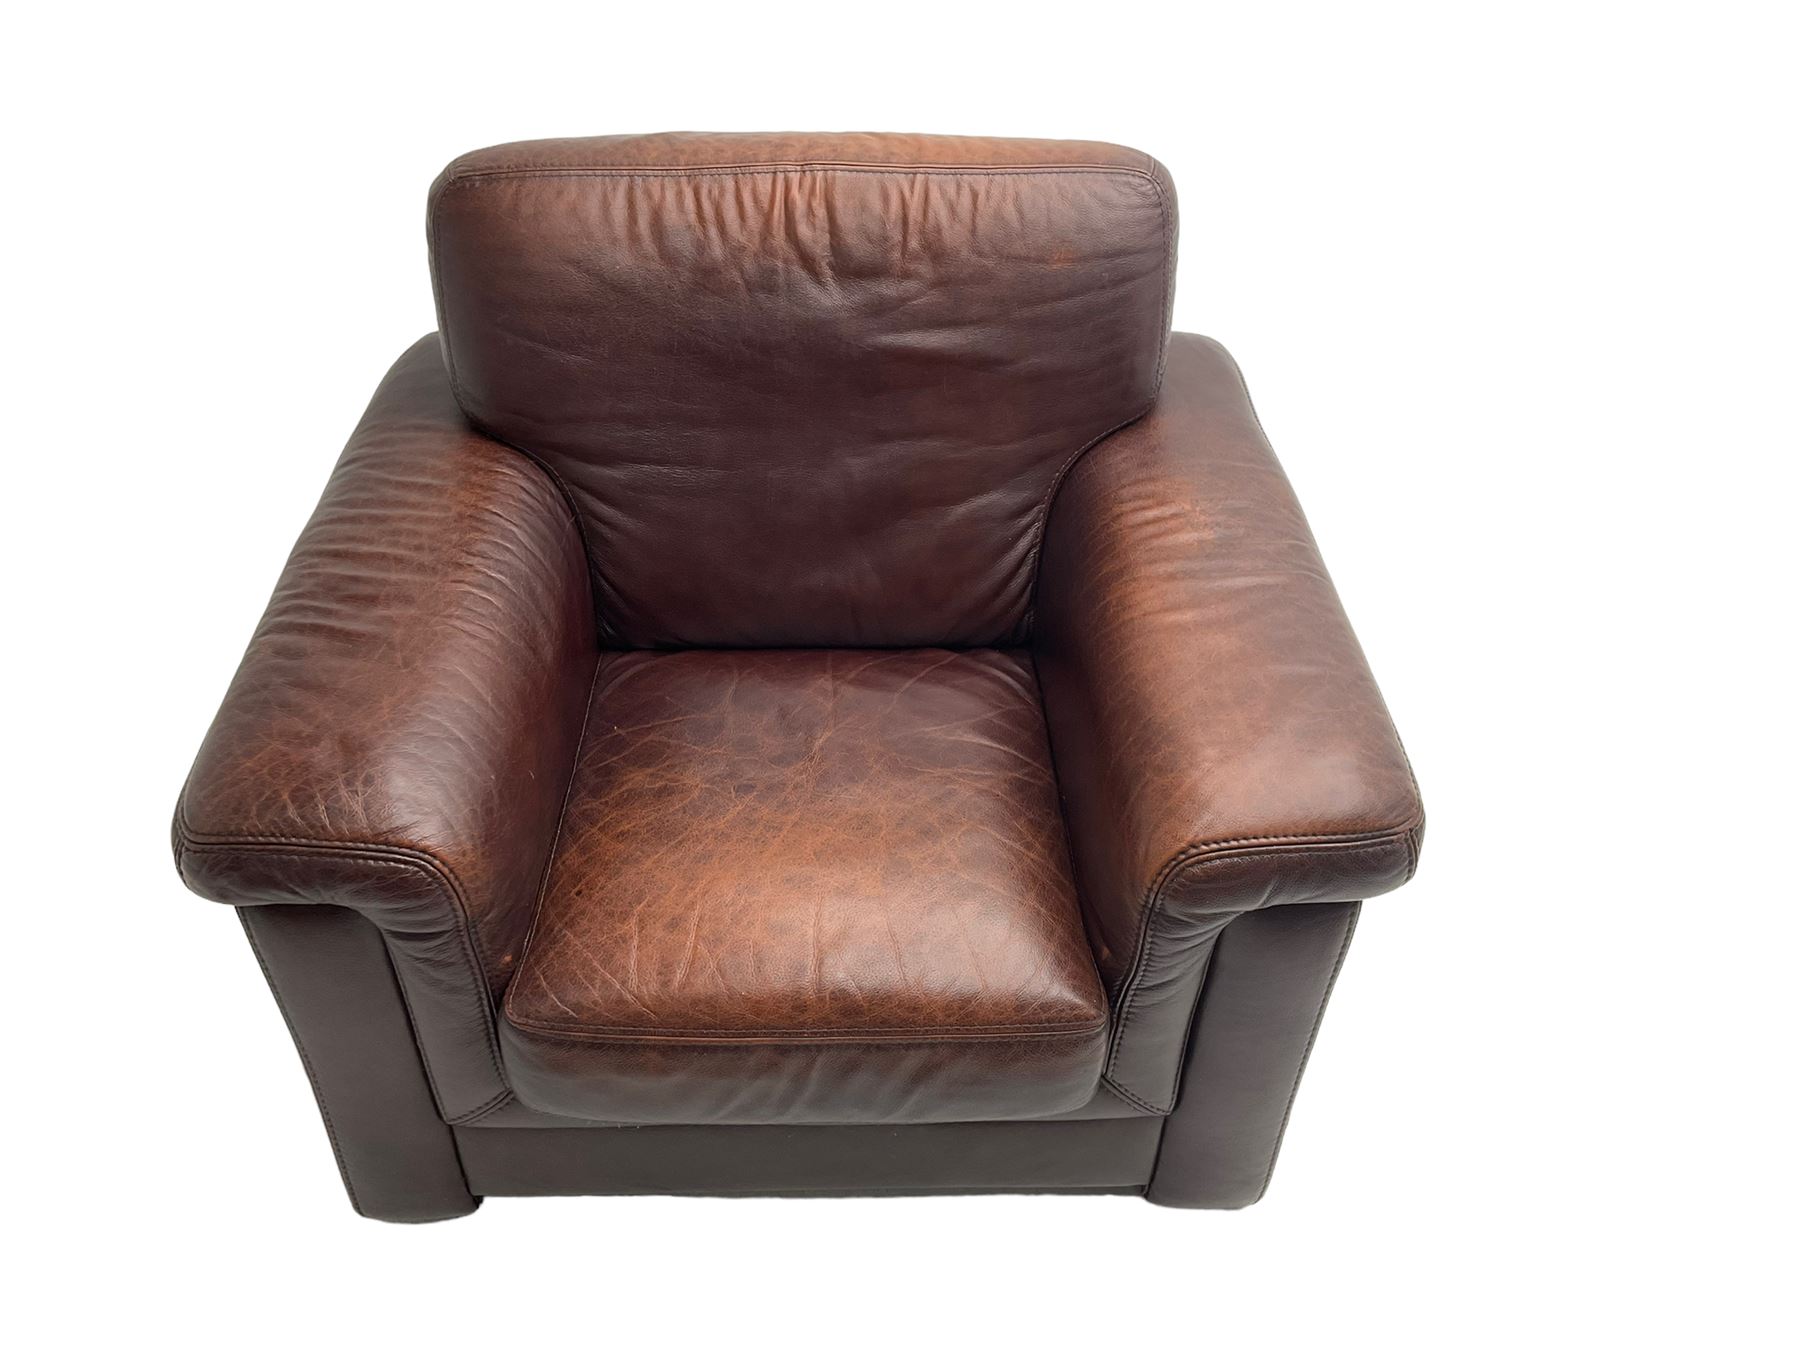 Large armchair upholstered in chocolate brown leather - Image 2 of 6